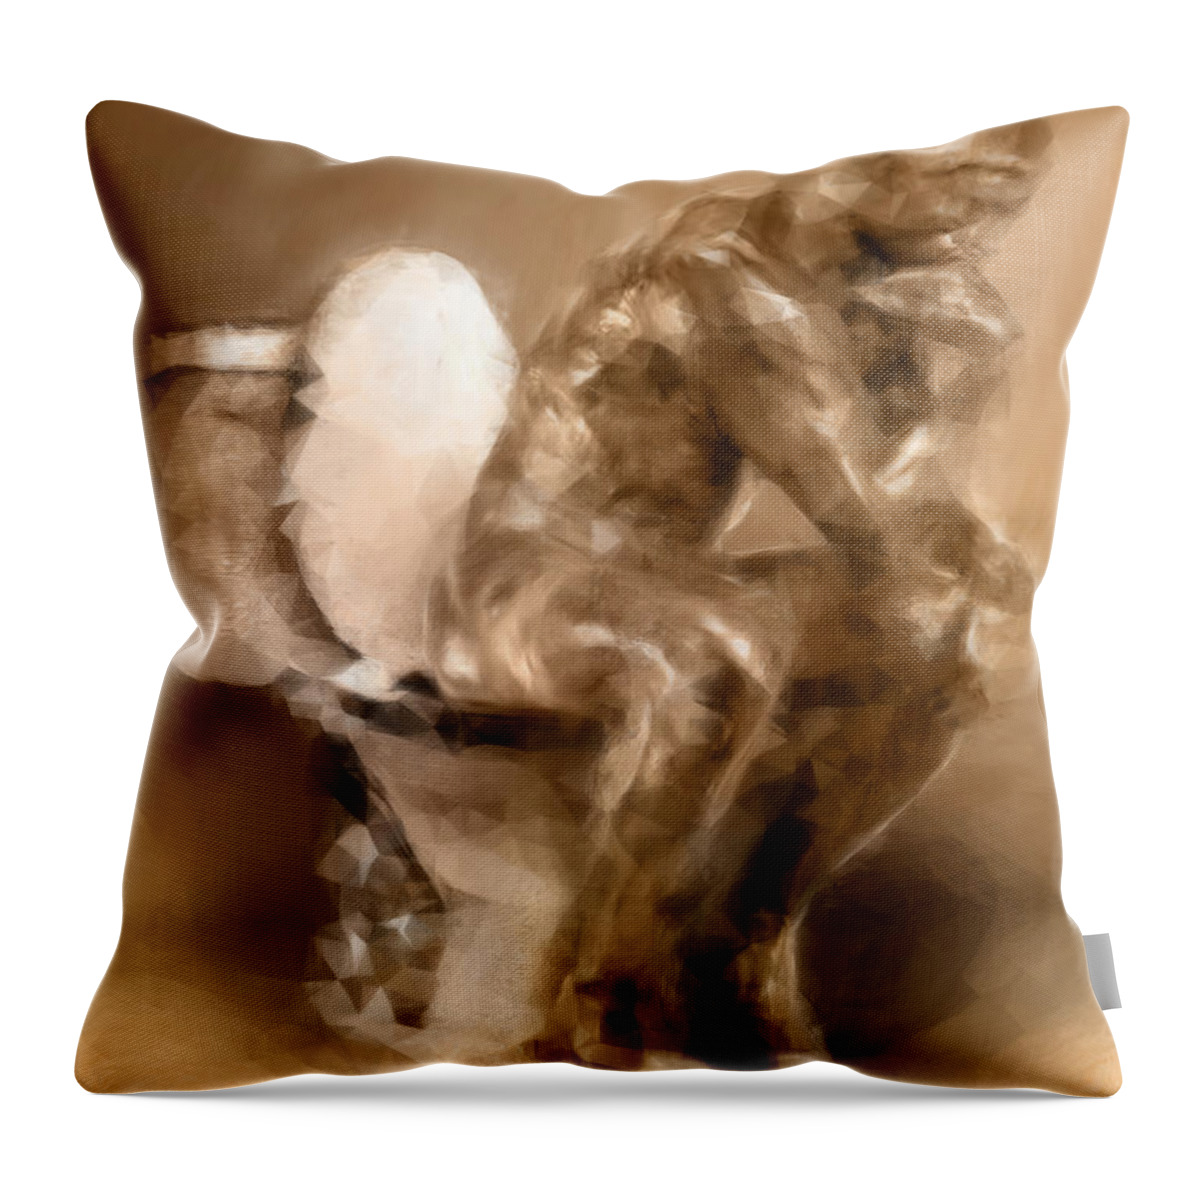 Thinker Throw Pillow featuring the painting Thinker by Vart Studio